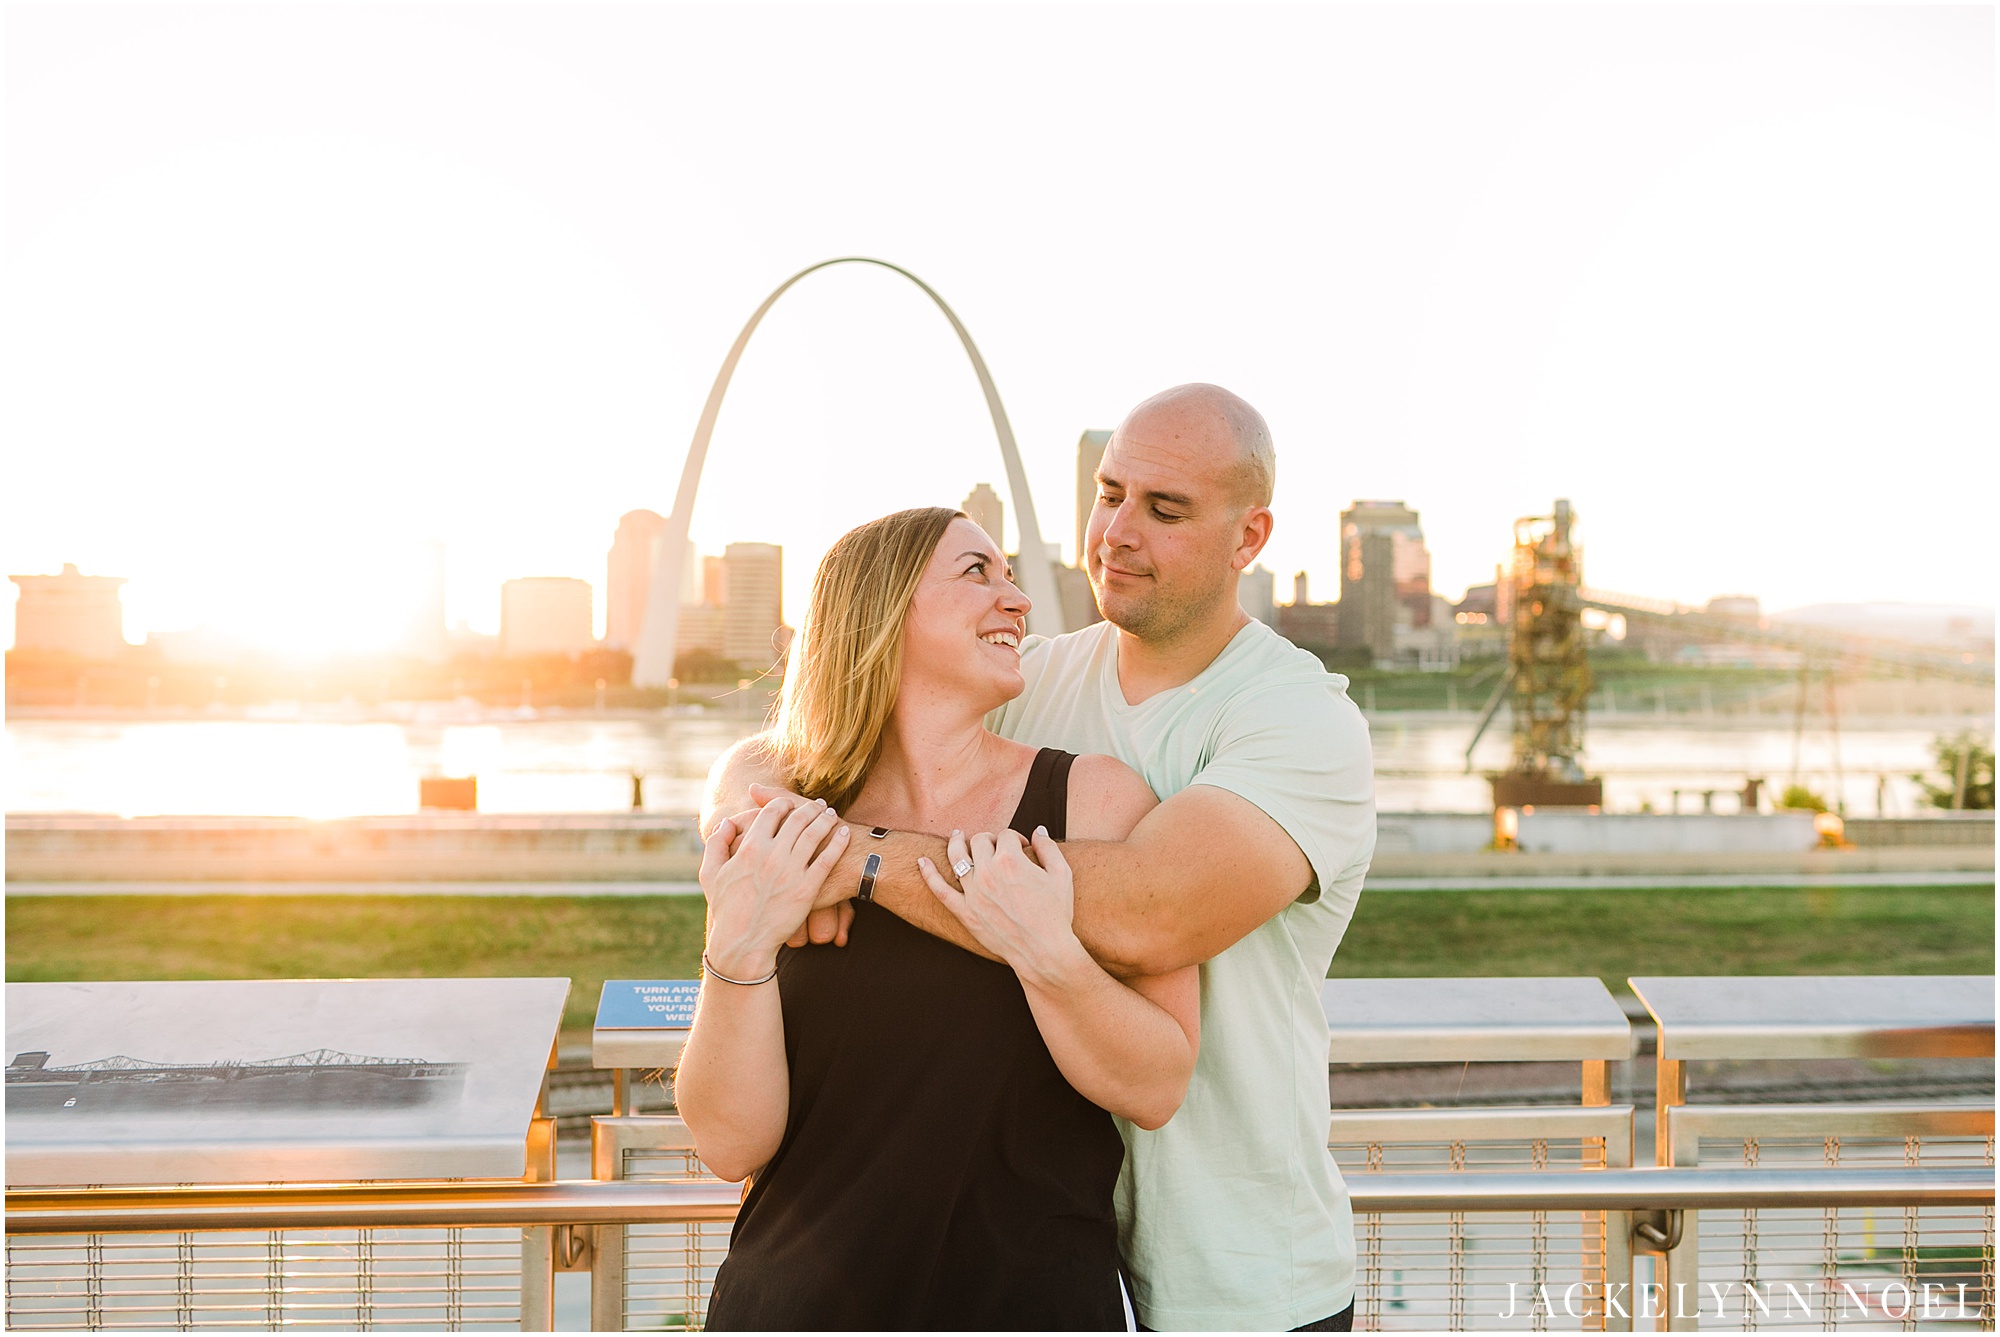 Danielle & Ian's downtown St. Louis Engagement Session by Jackelynn Noel Photography